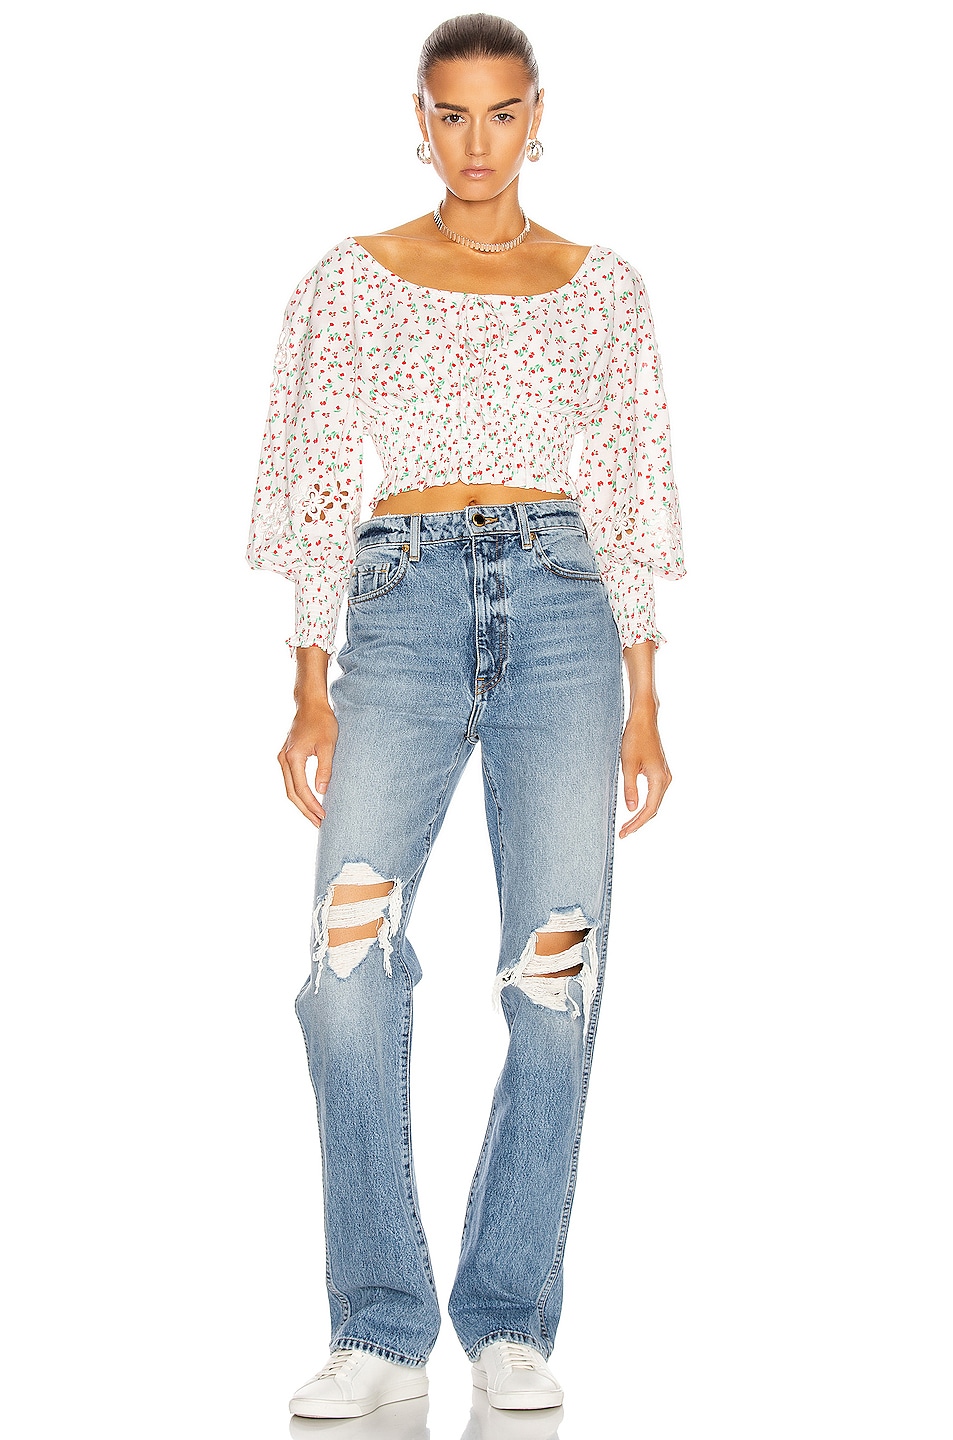 RIXO Helena Top in Embroidered Ditsy Floral | FWRD